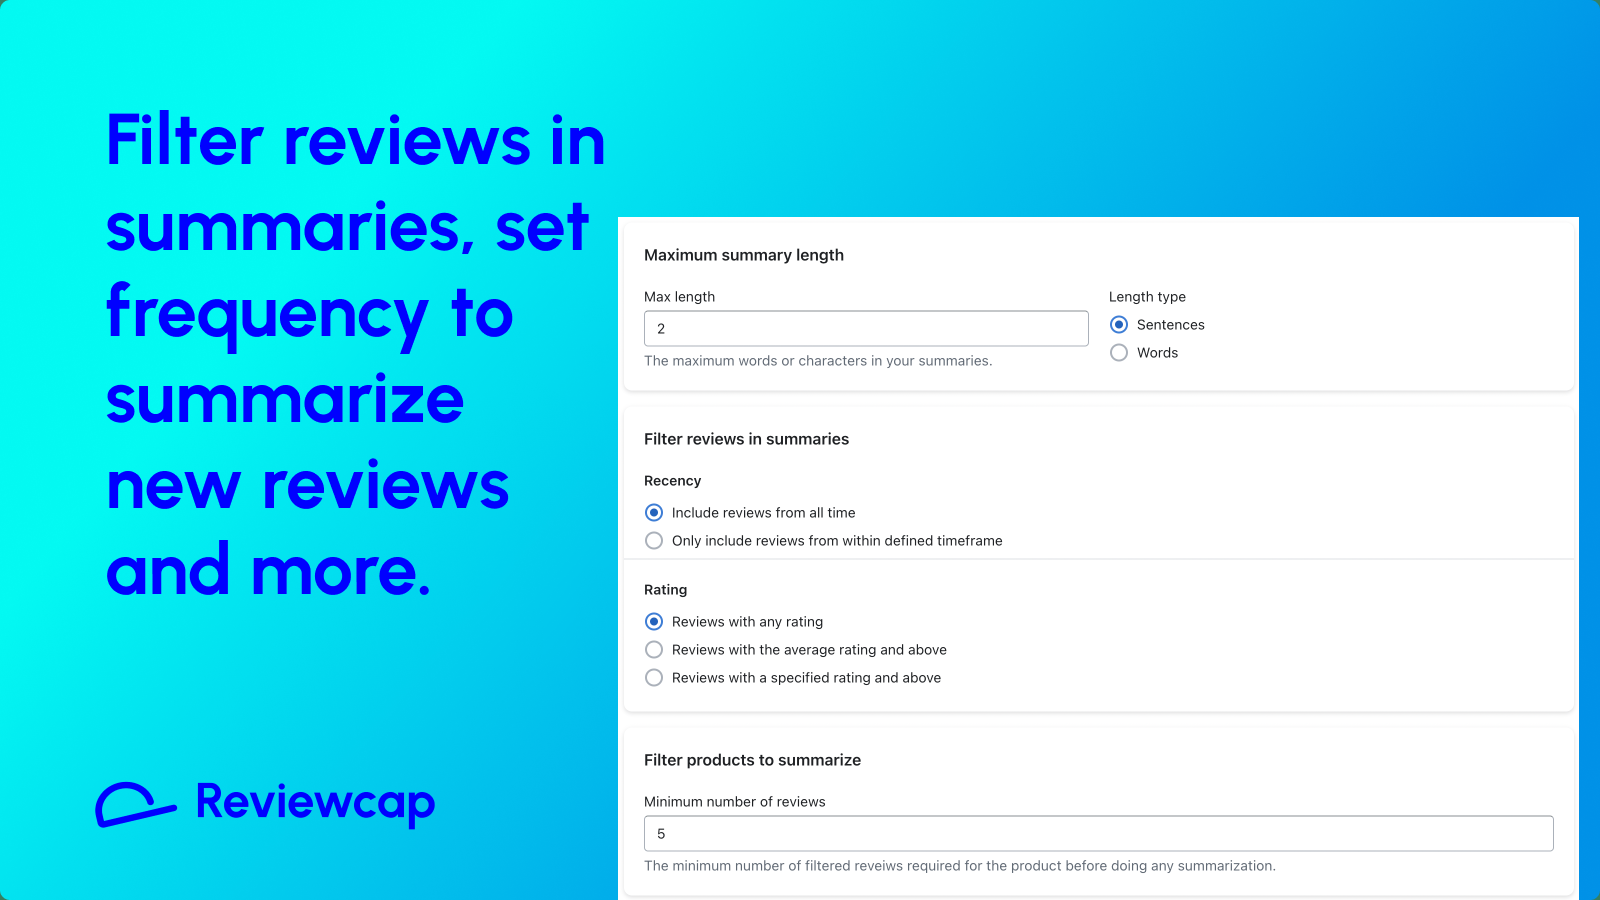 Filter reviews in summaries, set frequency to summarize.